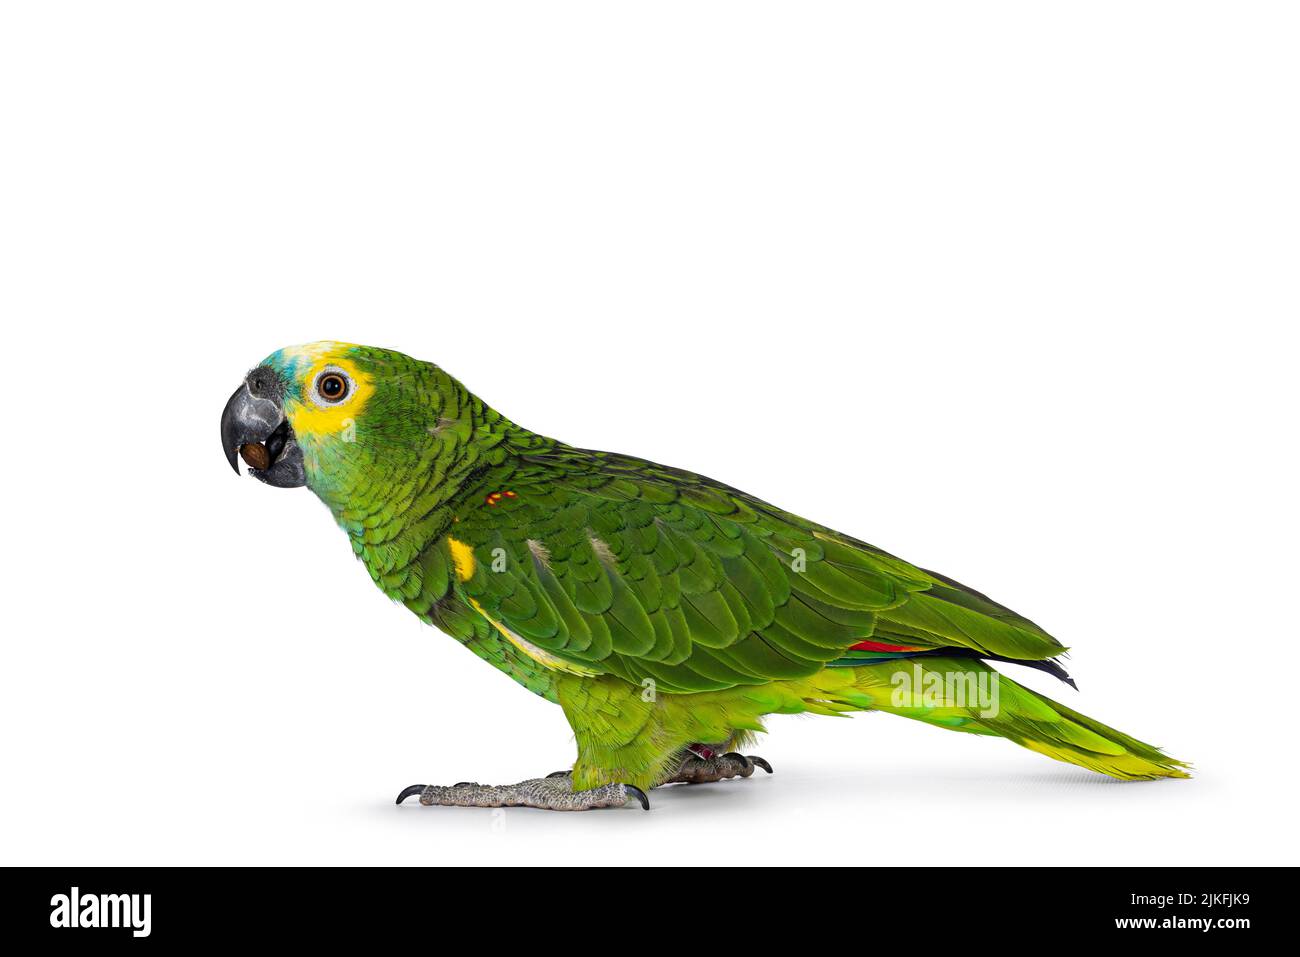 Blue or turquoise fronted Amazone parrot aka Amazona aestiva, sitting side ways. Looking to the side showing profile. Isolated on a white background. Stock Photo